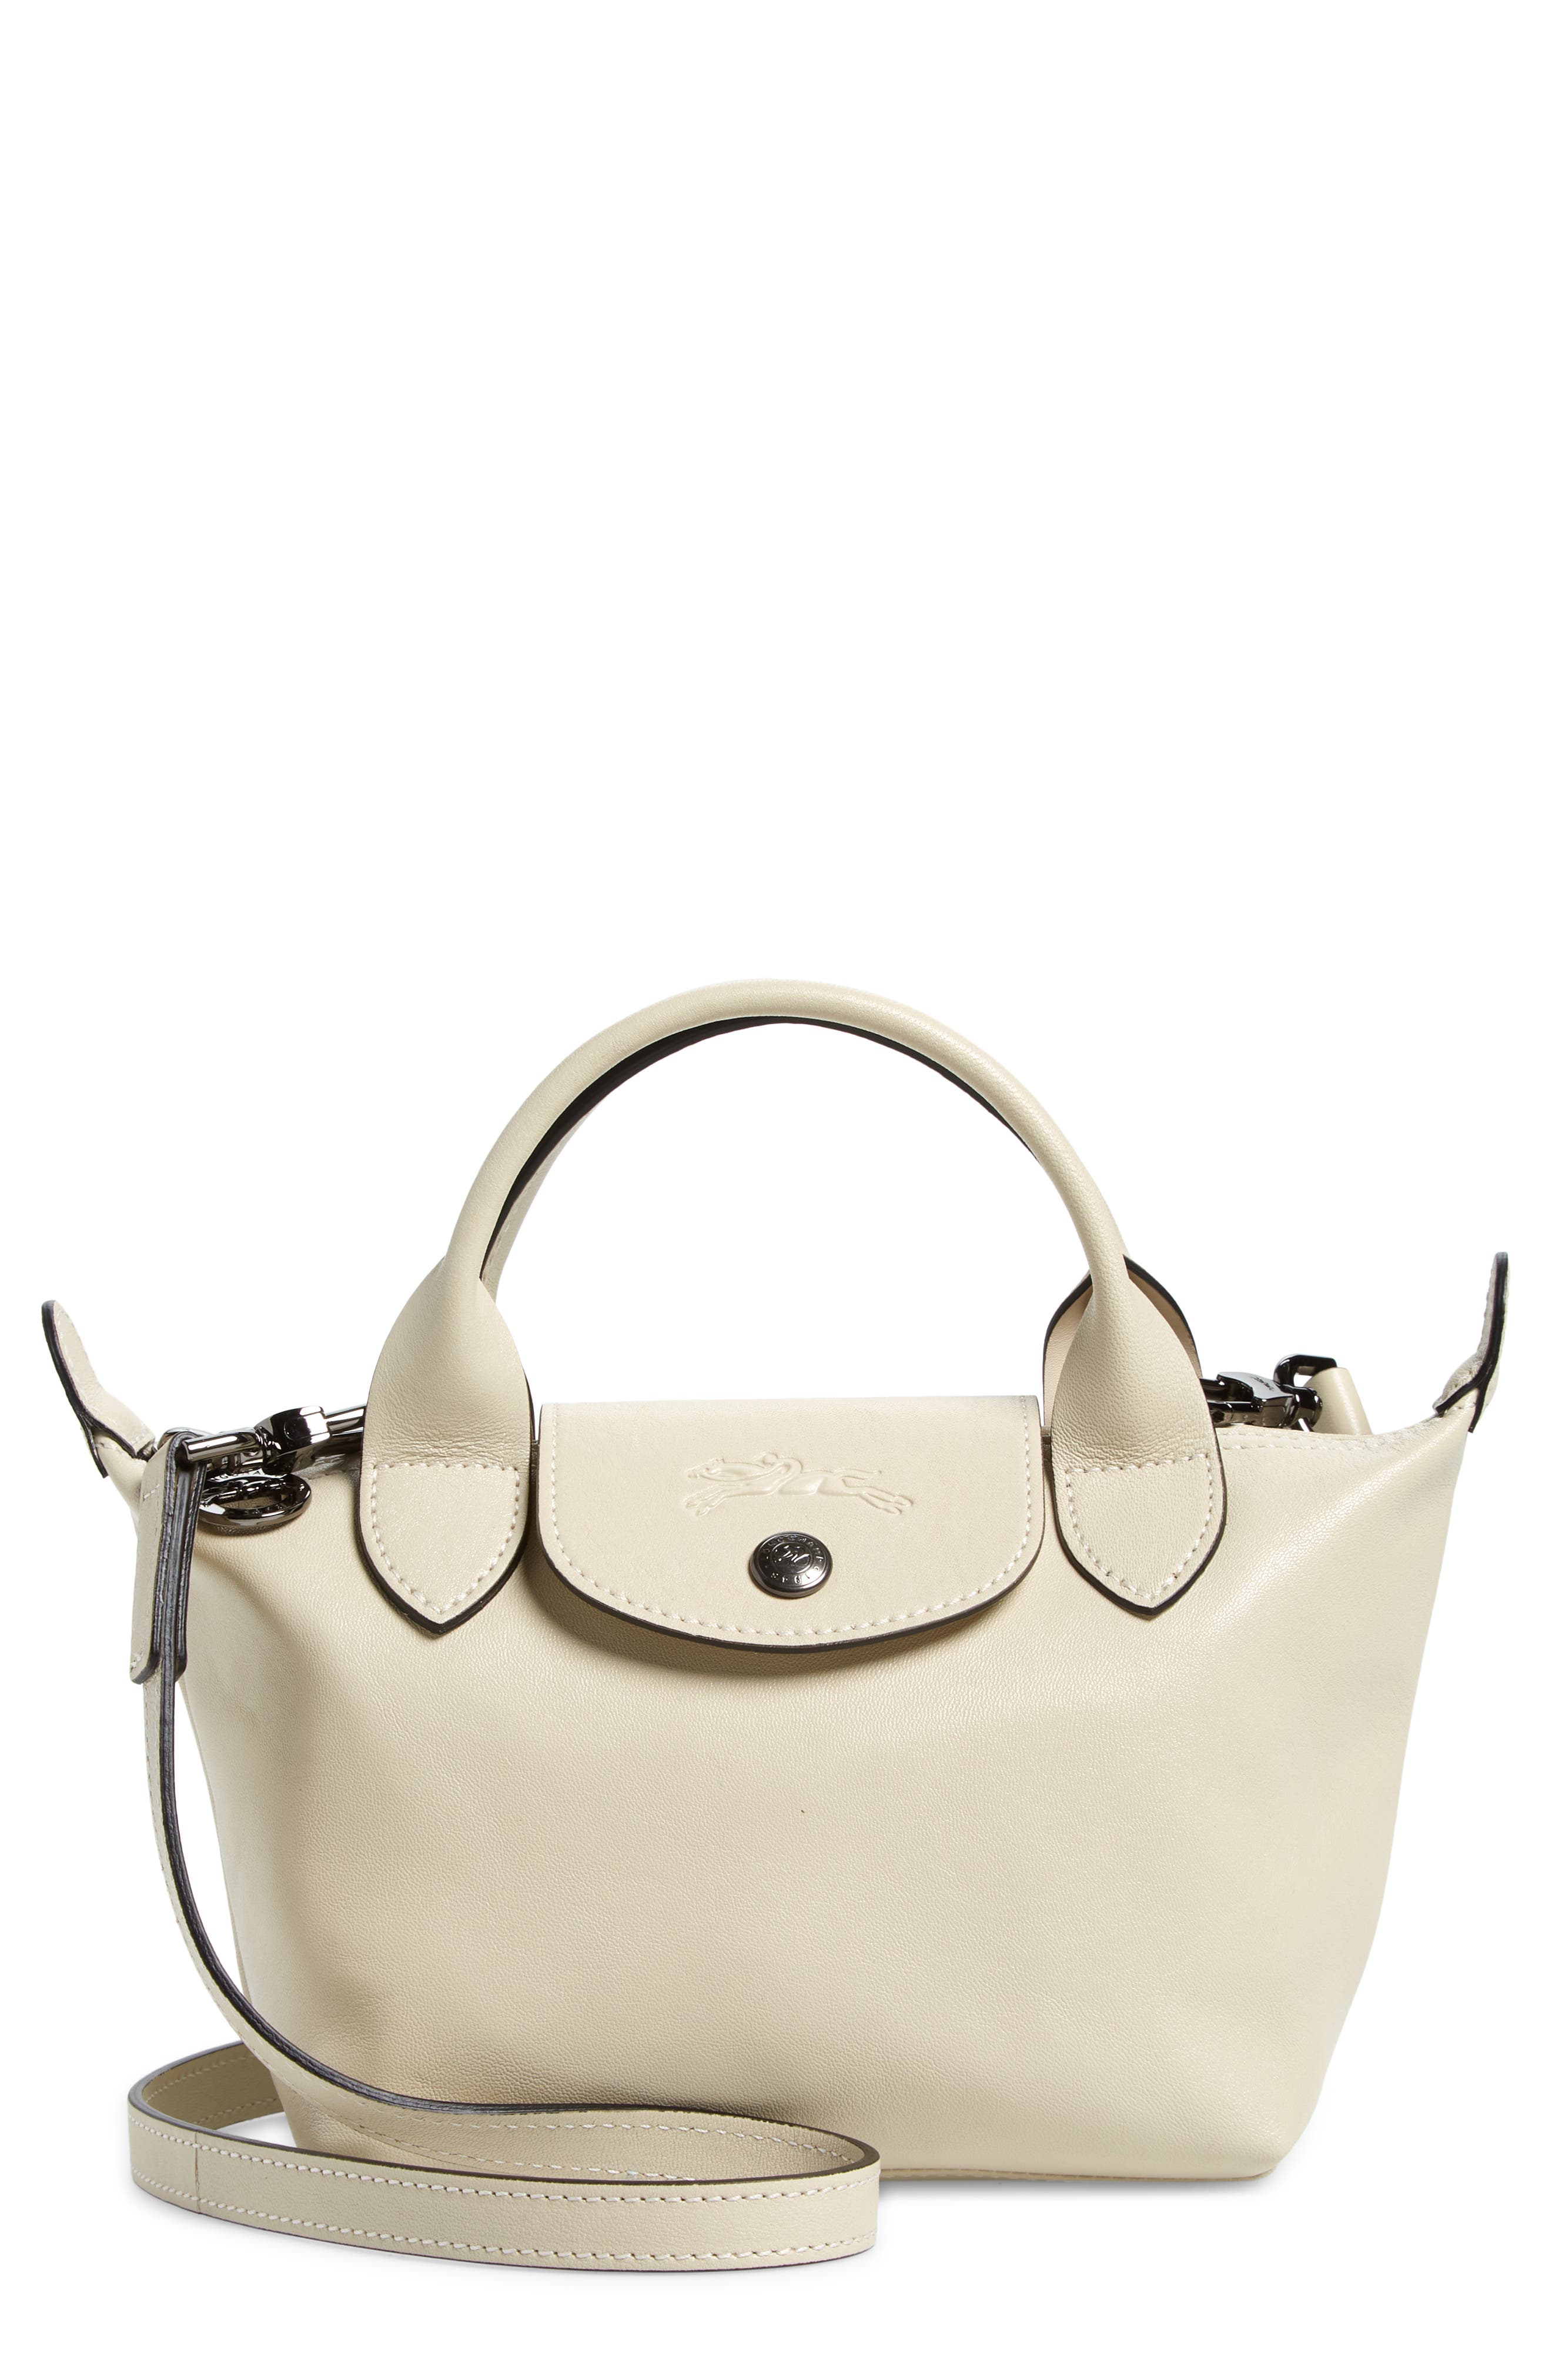 Longchamp Mini Le Pliage Cuir Leather Top Handle Bag in Ivory at Nordstrom